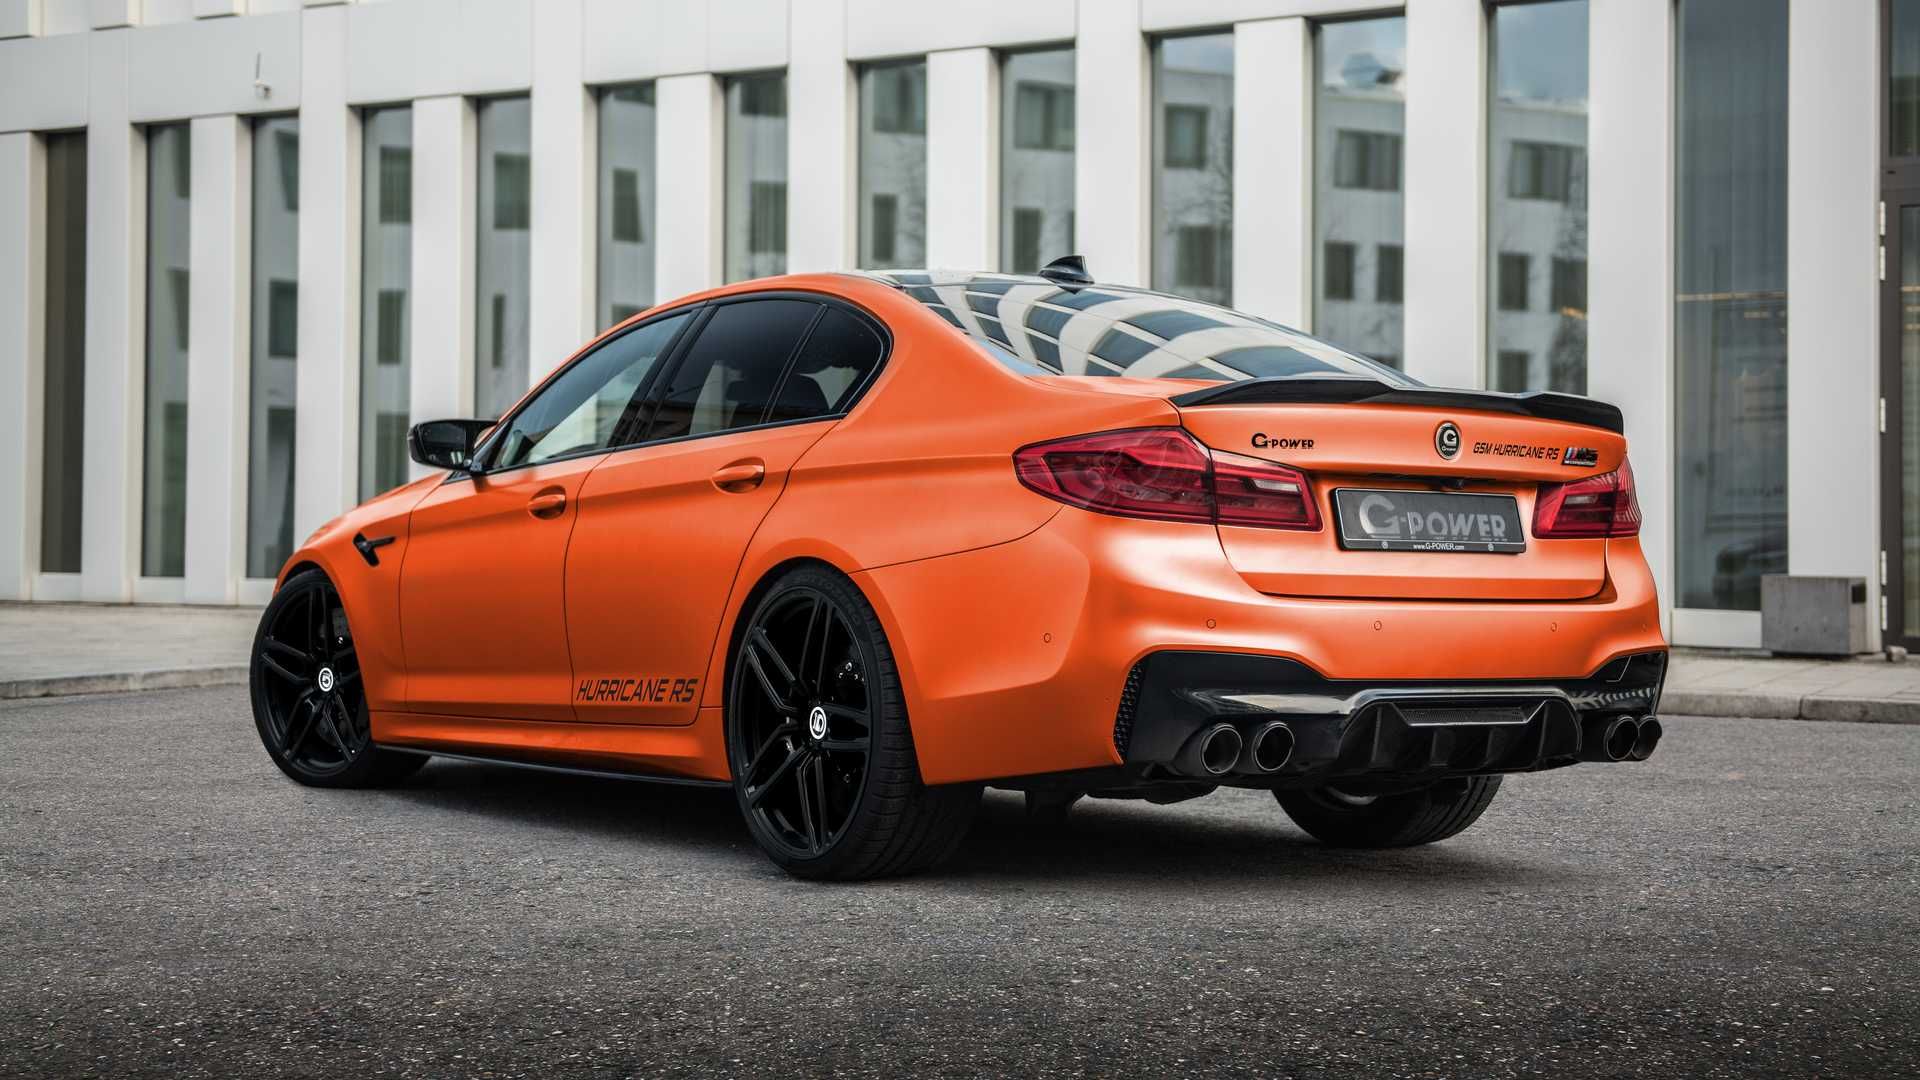 2020 BMW M5 Hurricane RS by G-Power